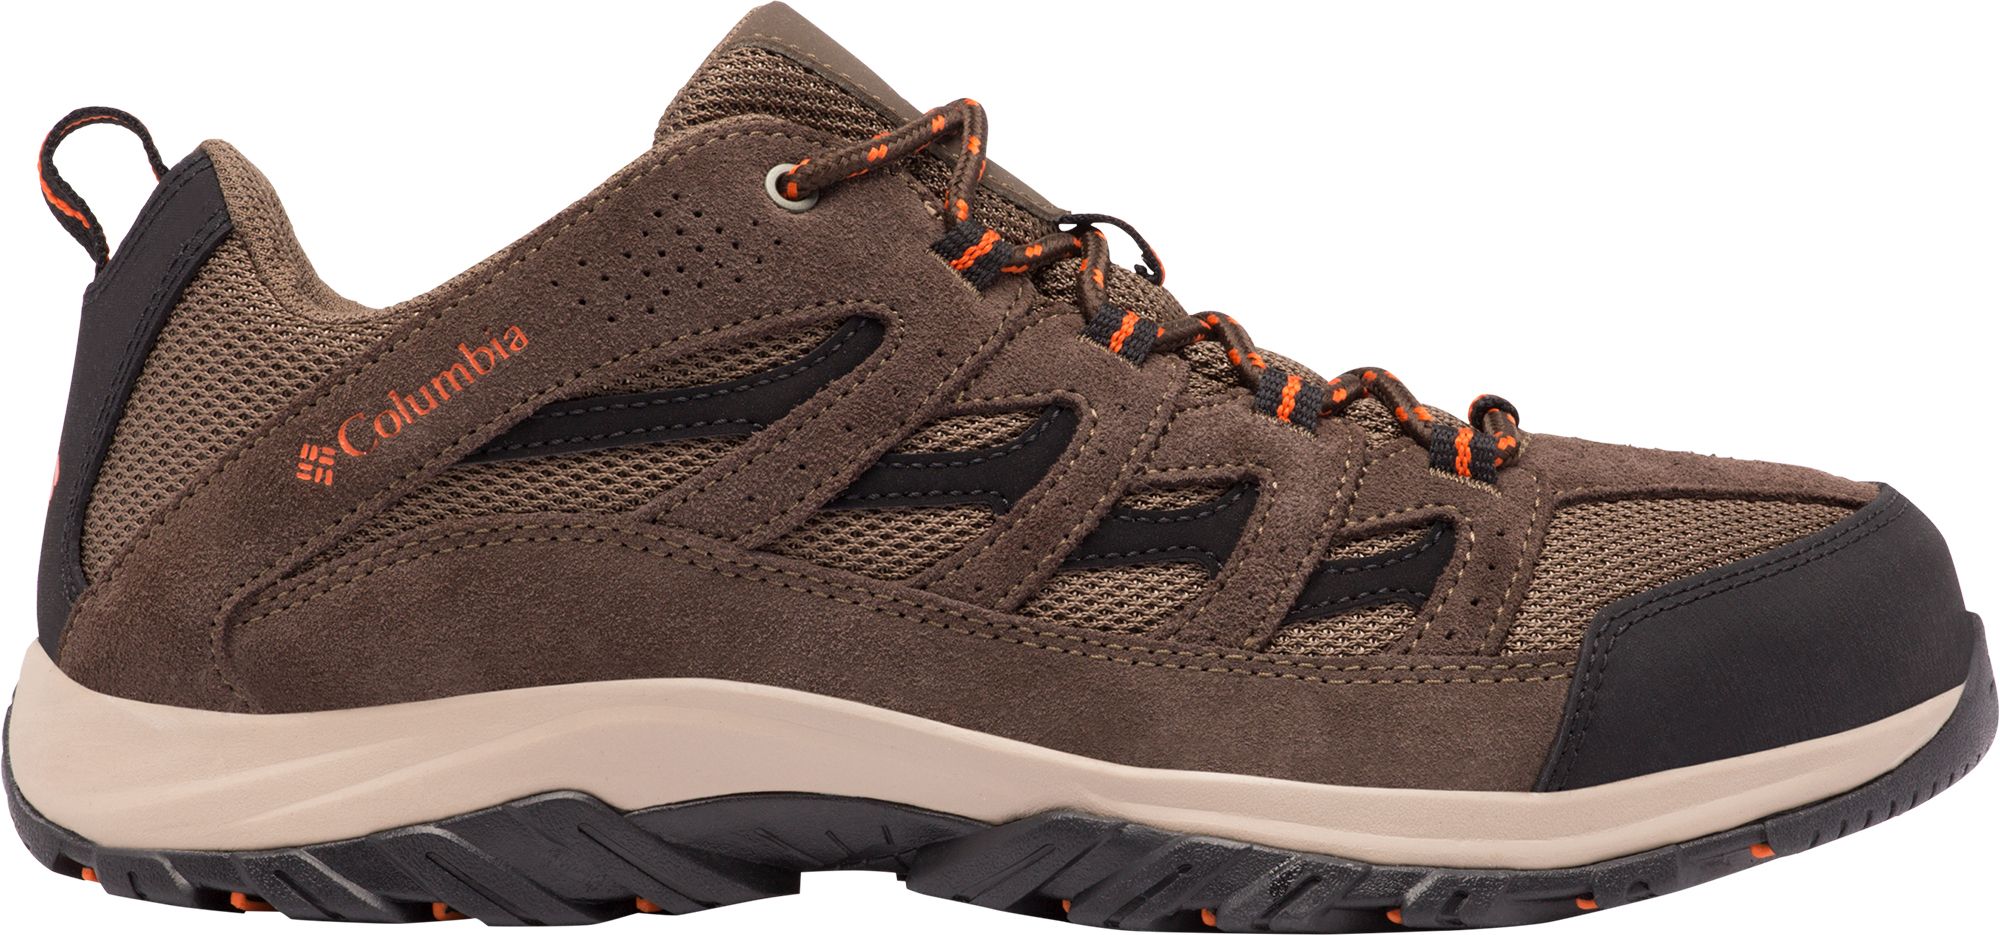 Photos - Trekking Shoes Columbia Men's Crestwood Hiking Shoes, Size 10, Camo Brown 18CMBMCRSTWDBLK 